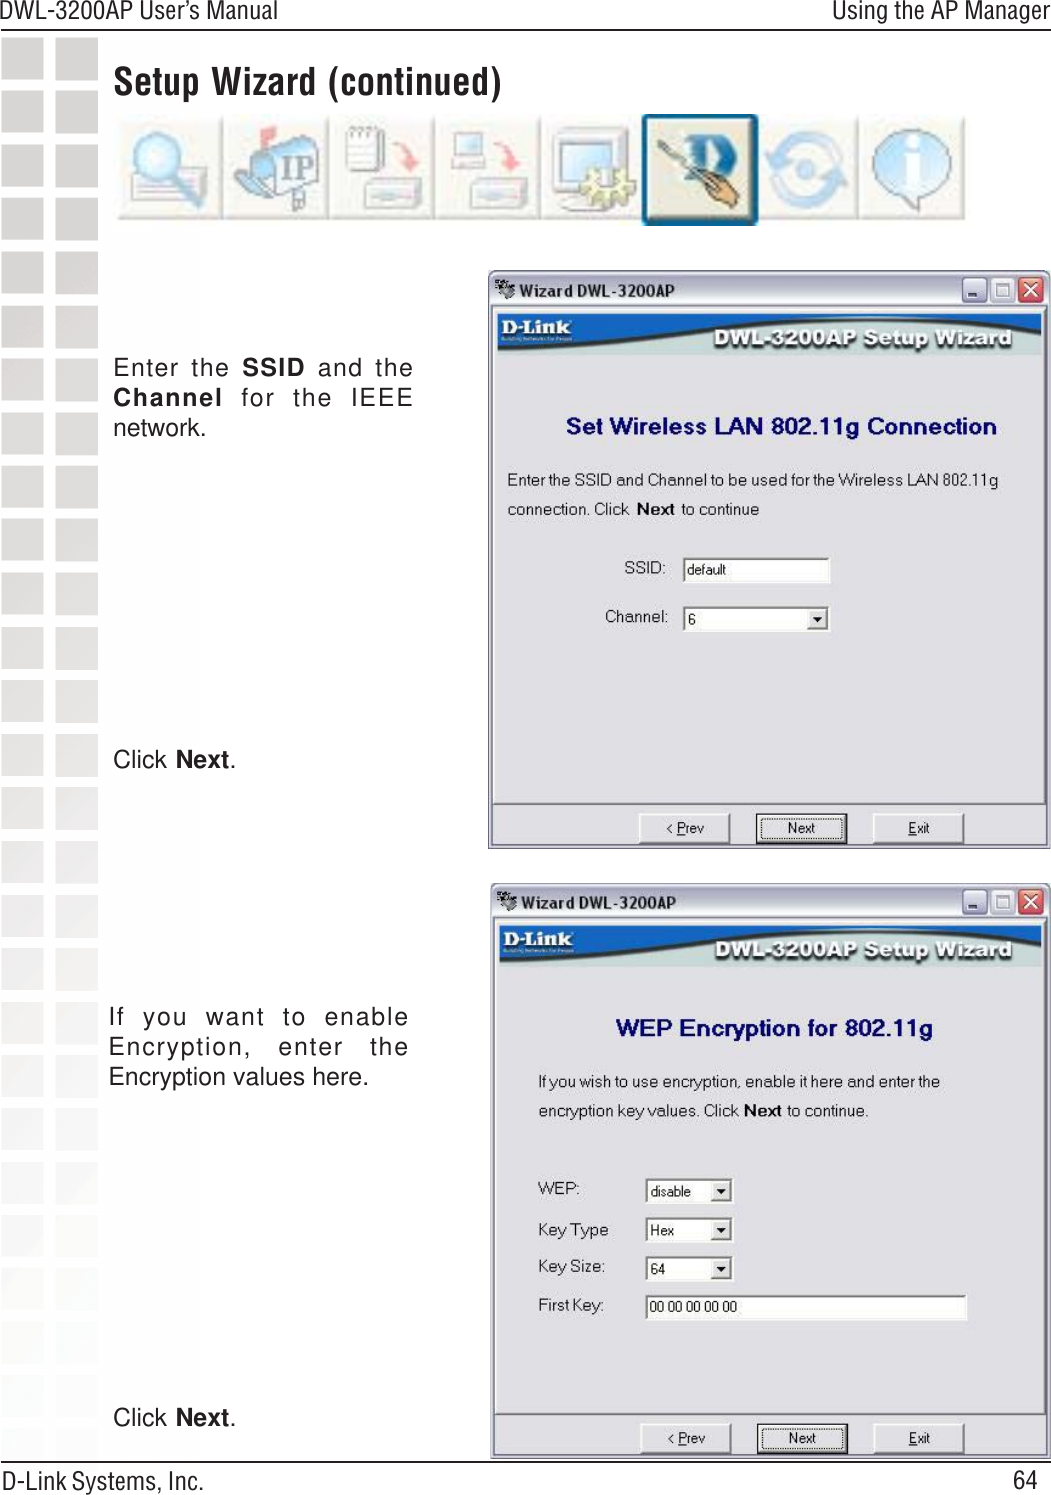 64DWL-3200AP User’s ManualD-Link Systems, Inc.Setup Wizard (continued)Enter the SSID and theChannel for the IEEEnetwork.Using the AP ManagerClick Next.If you want to enableEncryption, enter theEncryption values here.Click Next.